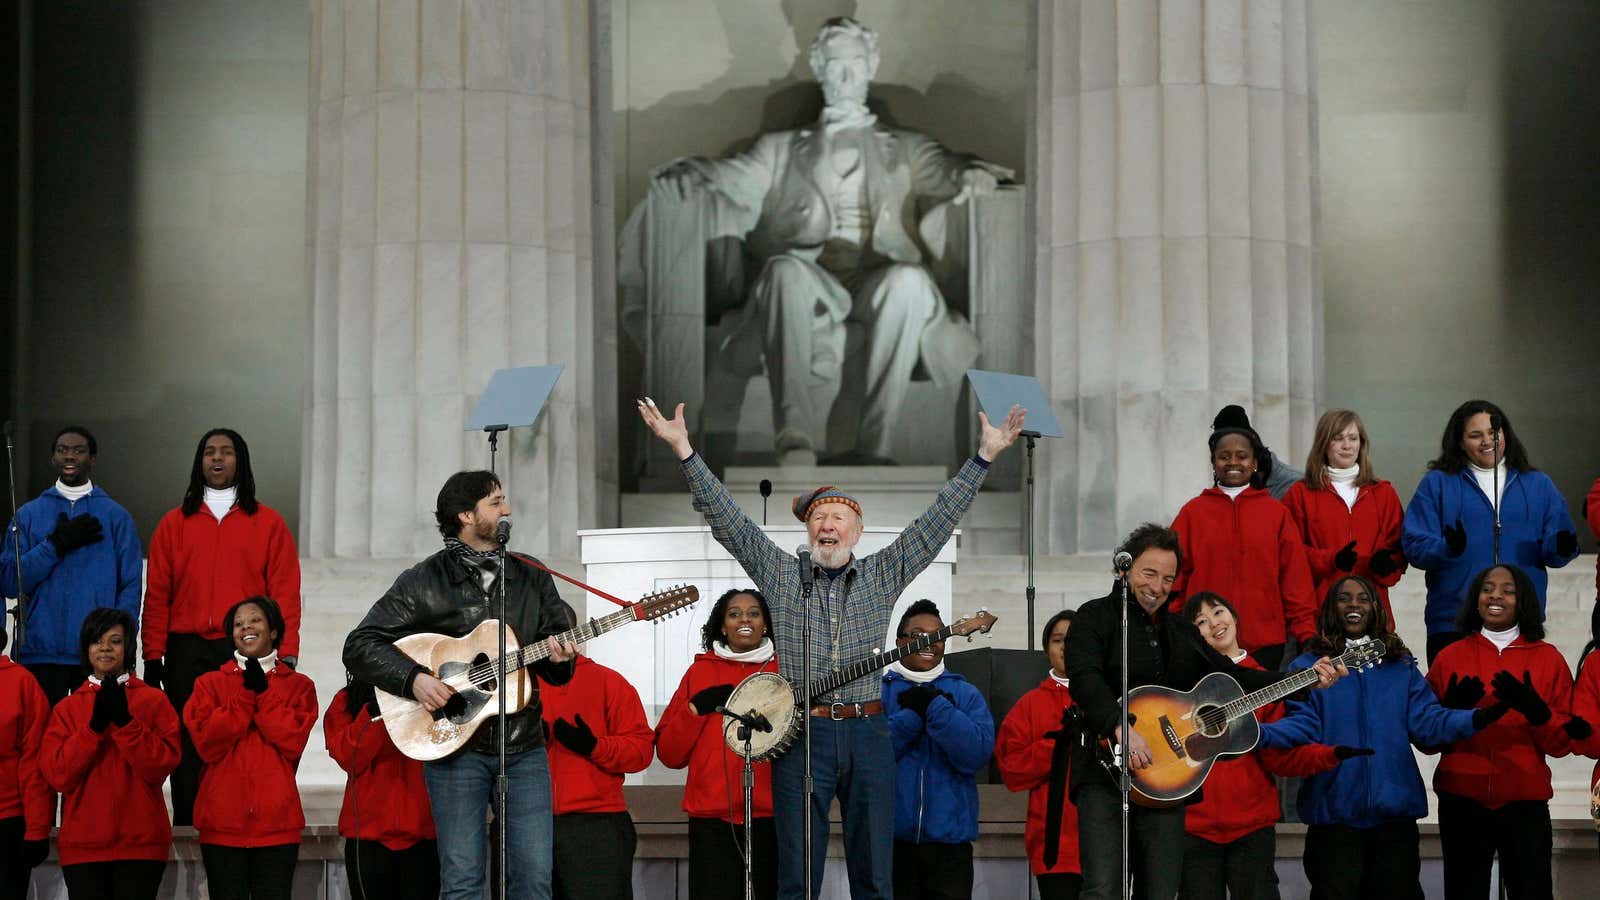 Seeger performing in Washington, DC in 2009.